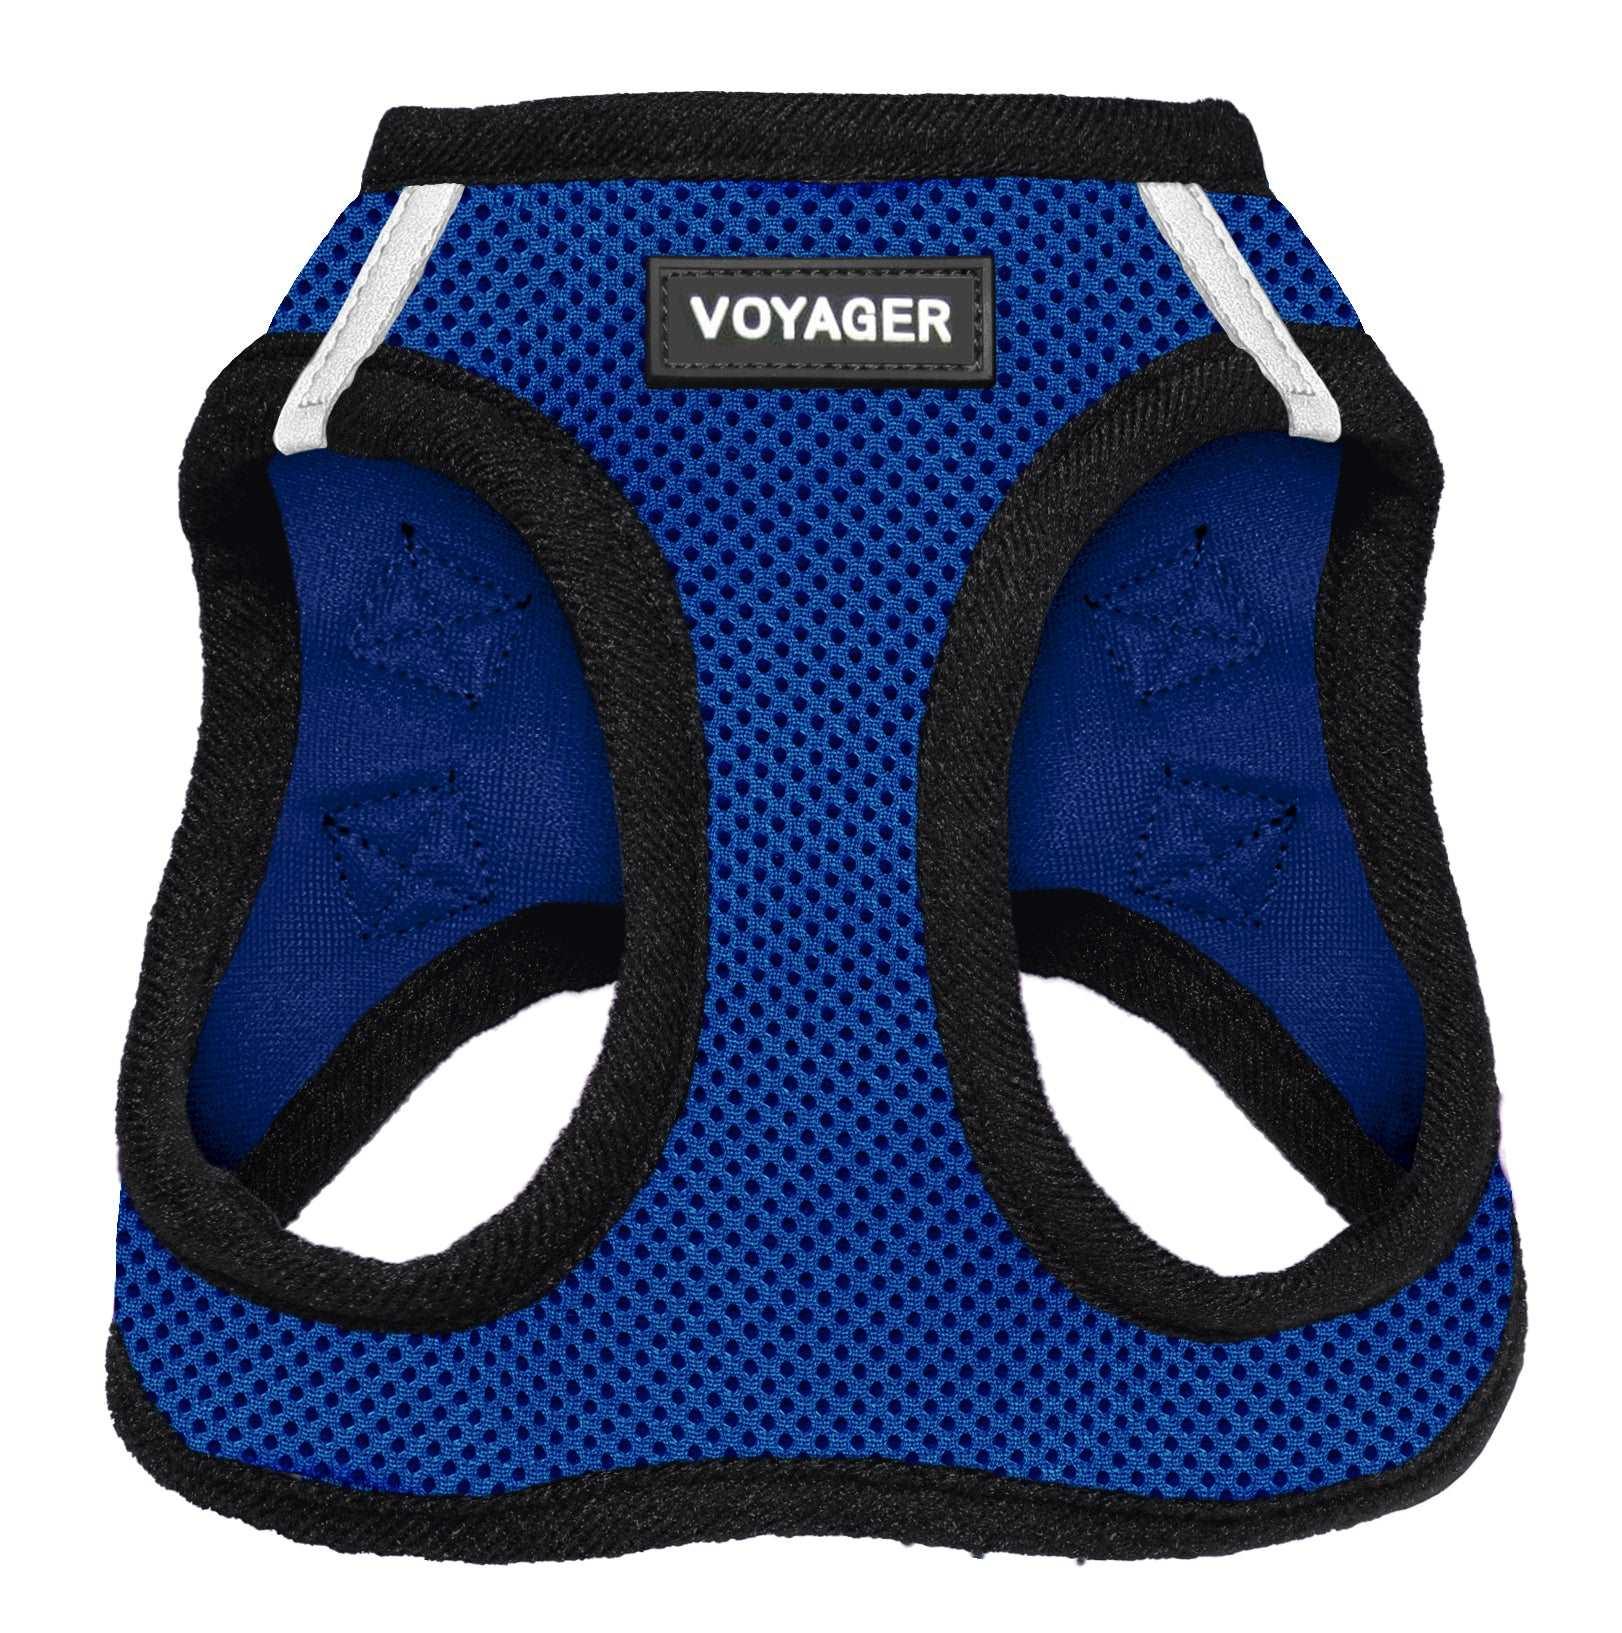 VOYAGER Step-In Air Pet Harness in Royal Blue with Black Trim - Front